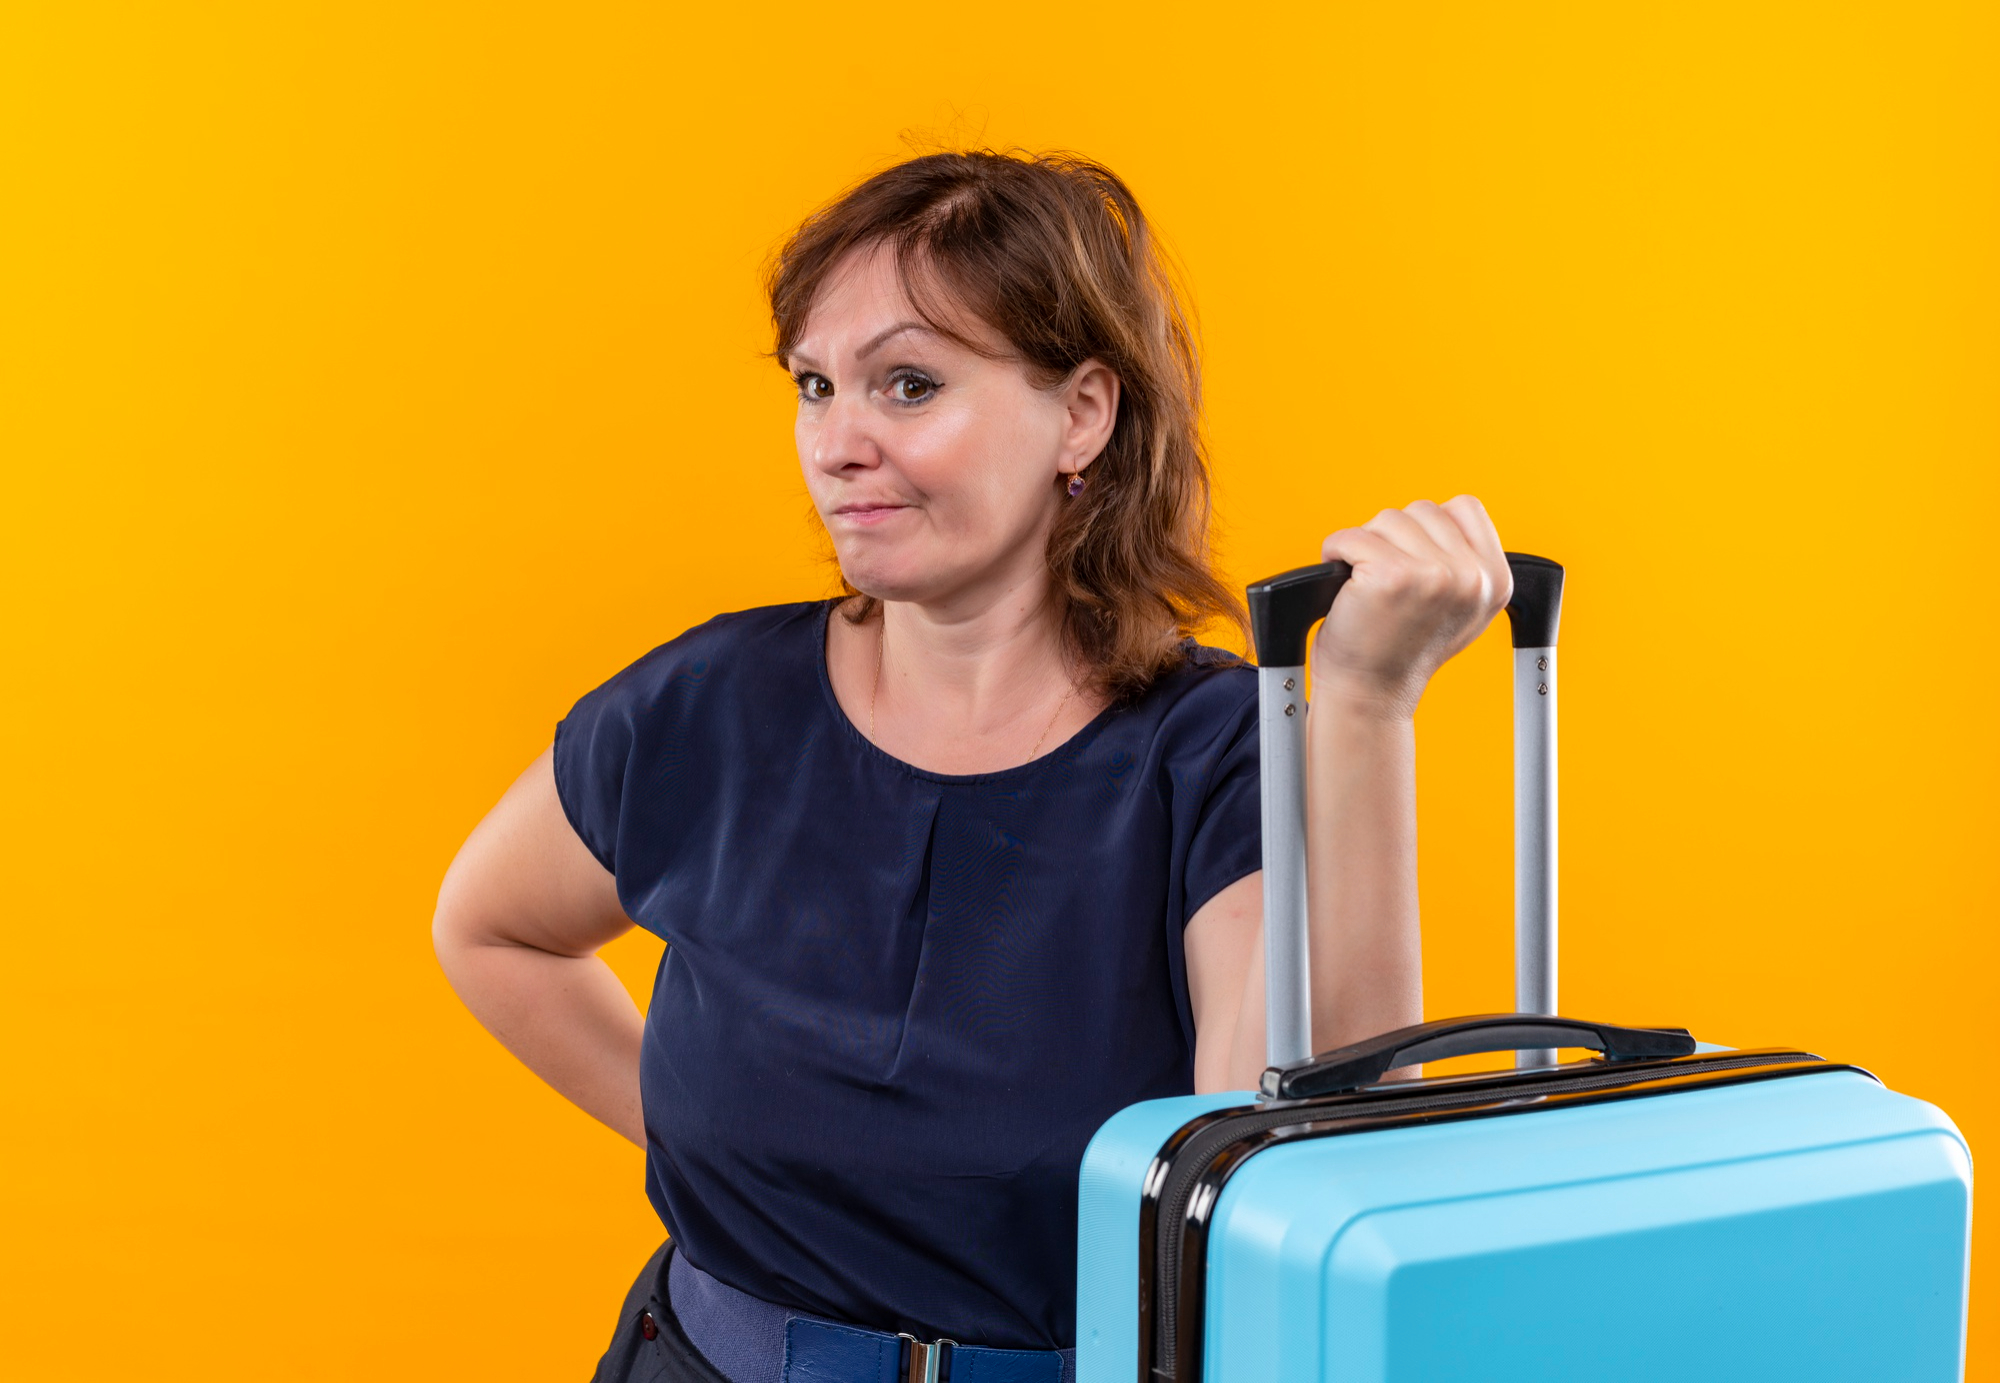 An annoyed-looking woman holding luggage | Source: Freepik